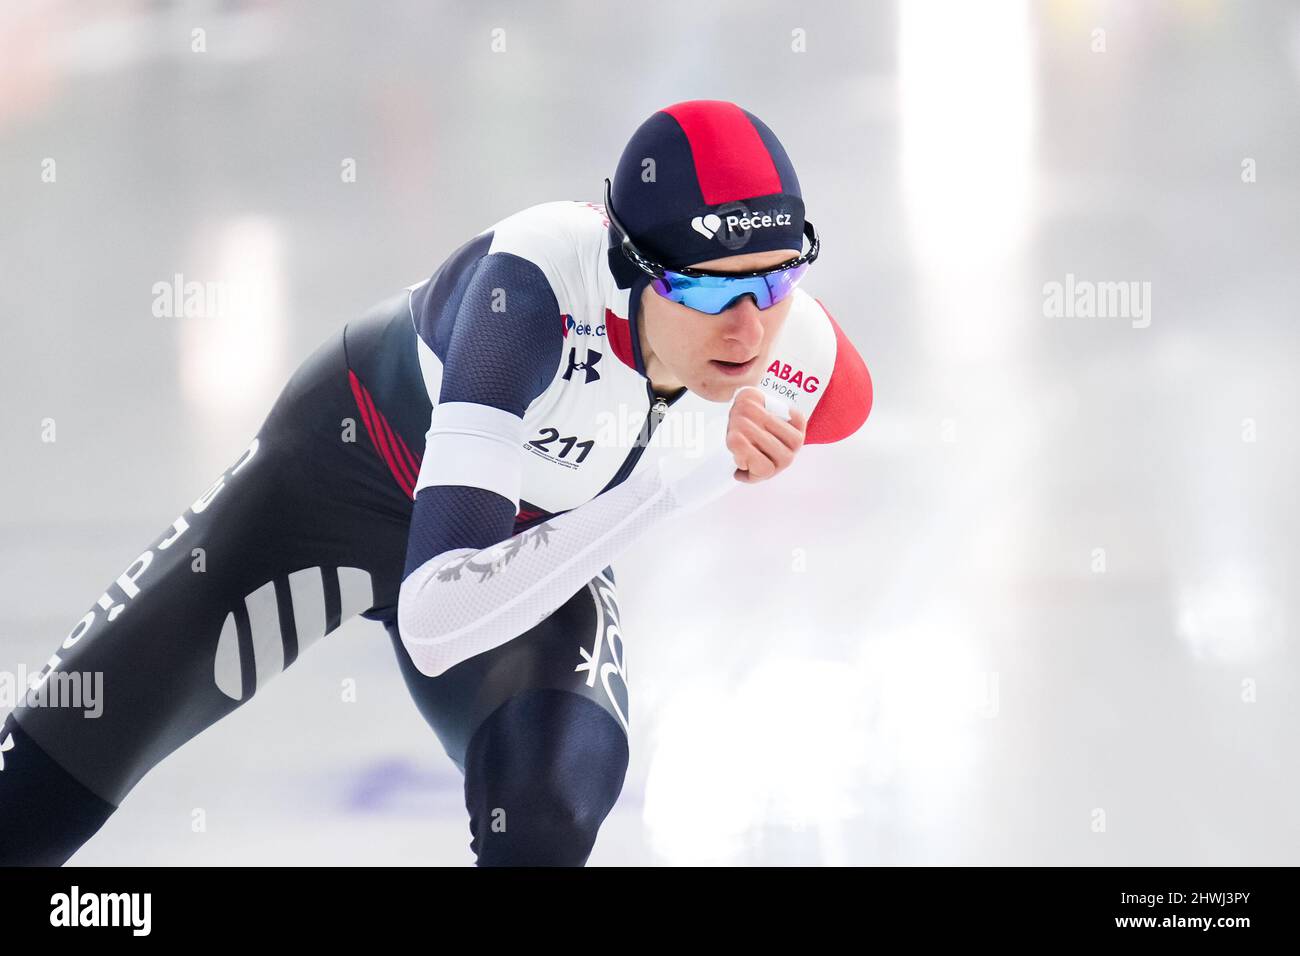 HAMAR, NORWAY - MARCH 6: Martina Sablikova of the Czech Republic competing in the Women's 1500m during the ISU World Speed Skating Championships Allround at the Vikingskipet on March 6, 2022 in Hamar, Norway (Photo by Douwe Bijlsma/Orange Pictures) Stock Photo